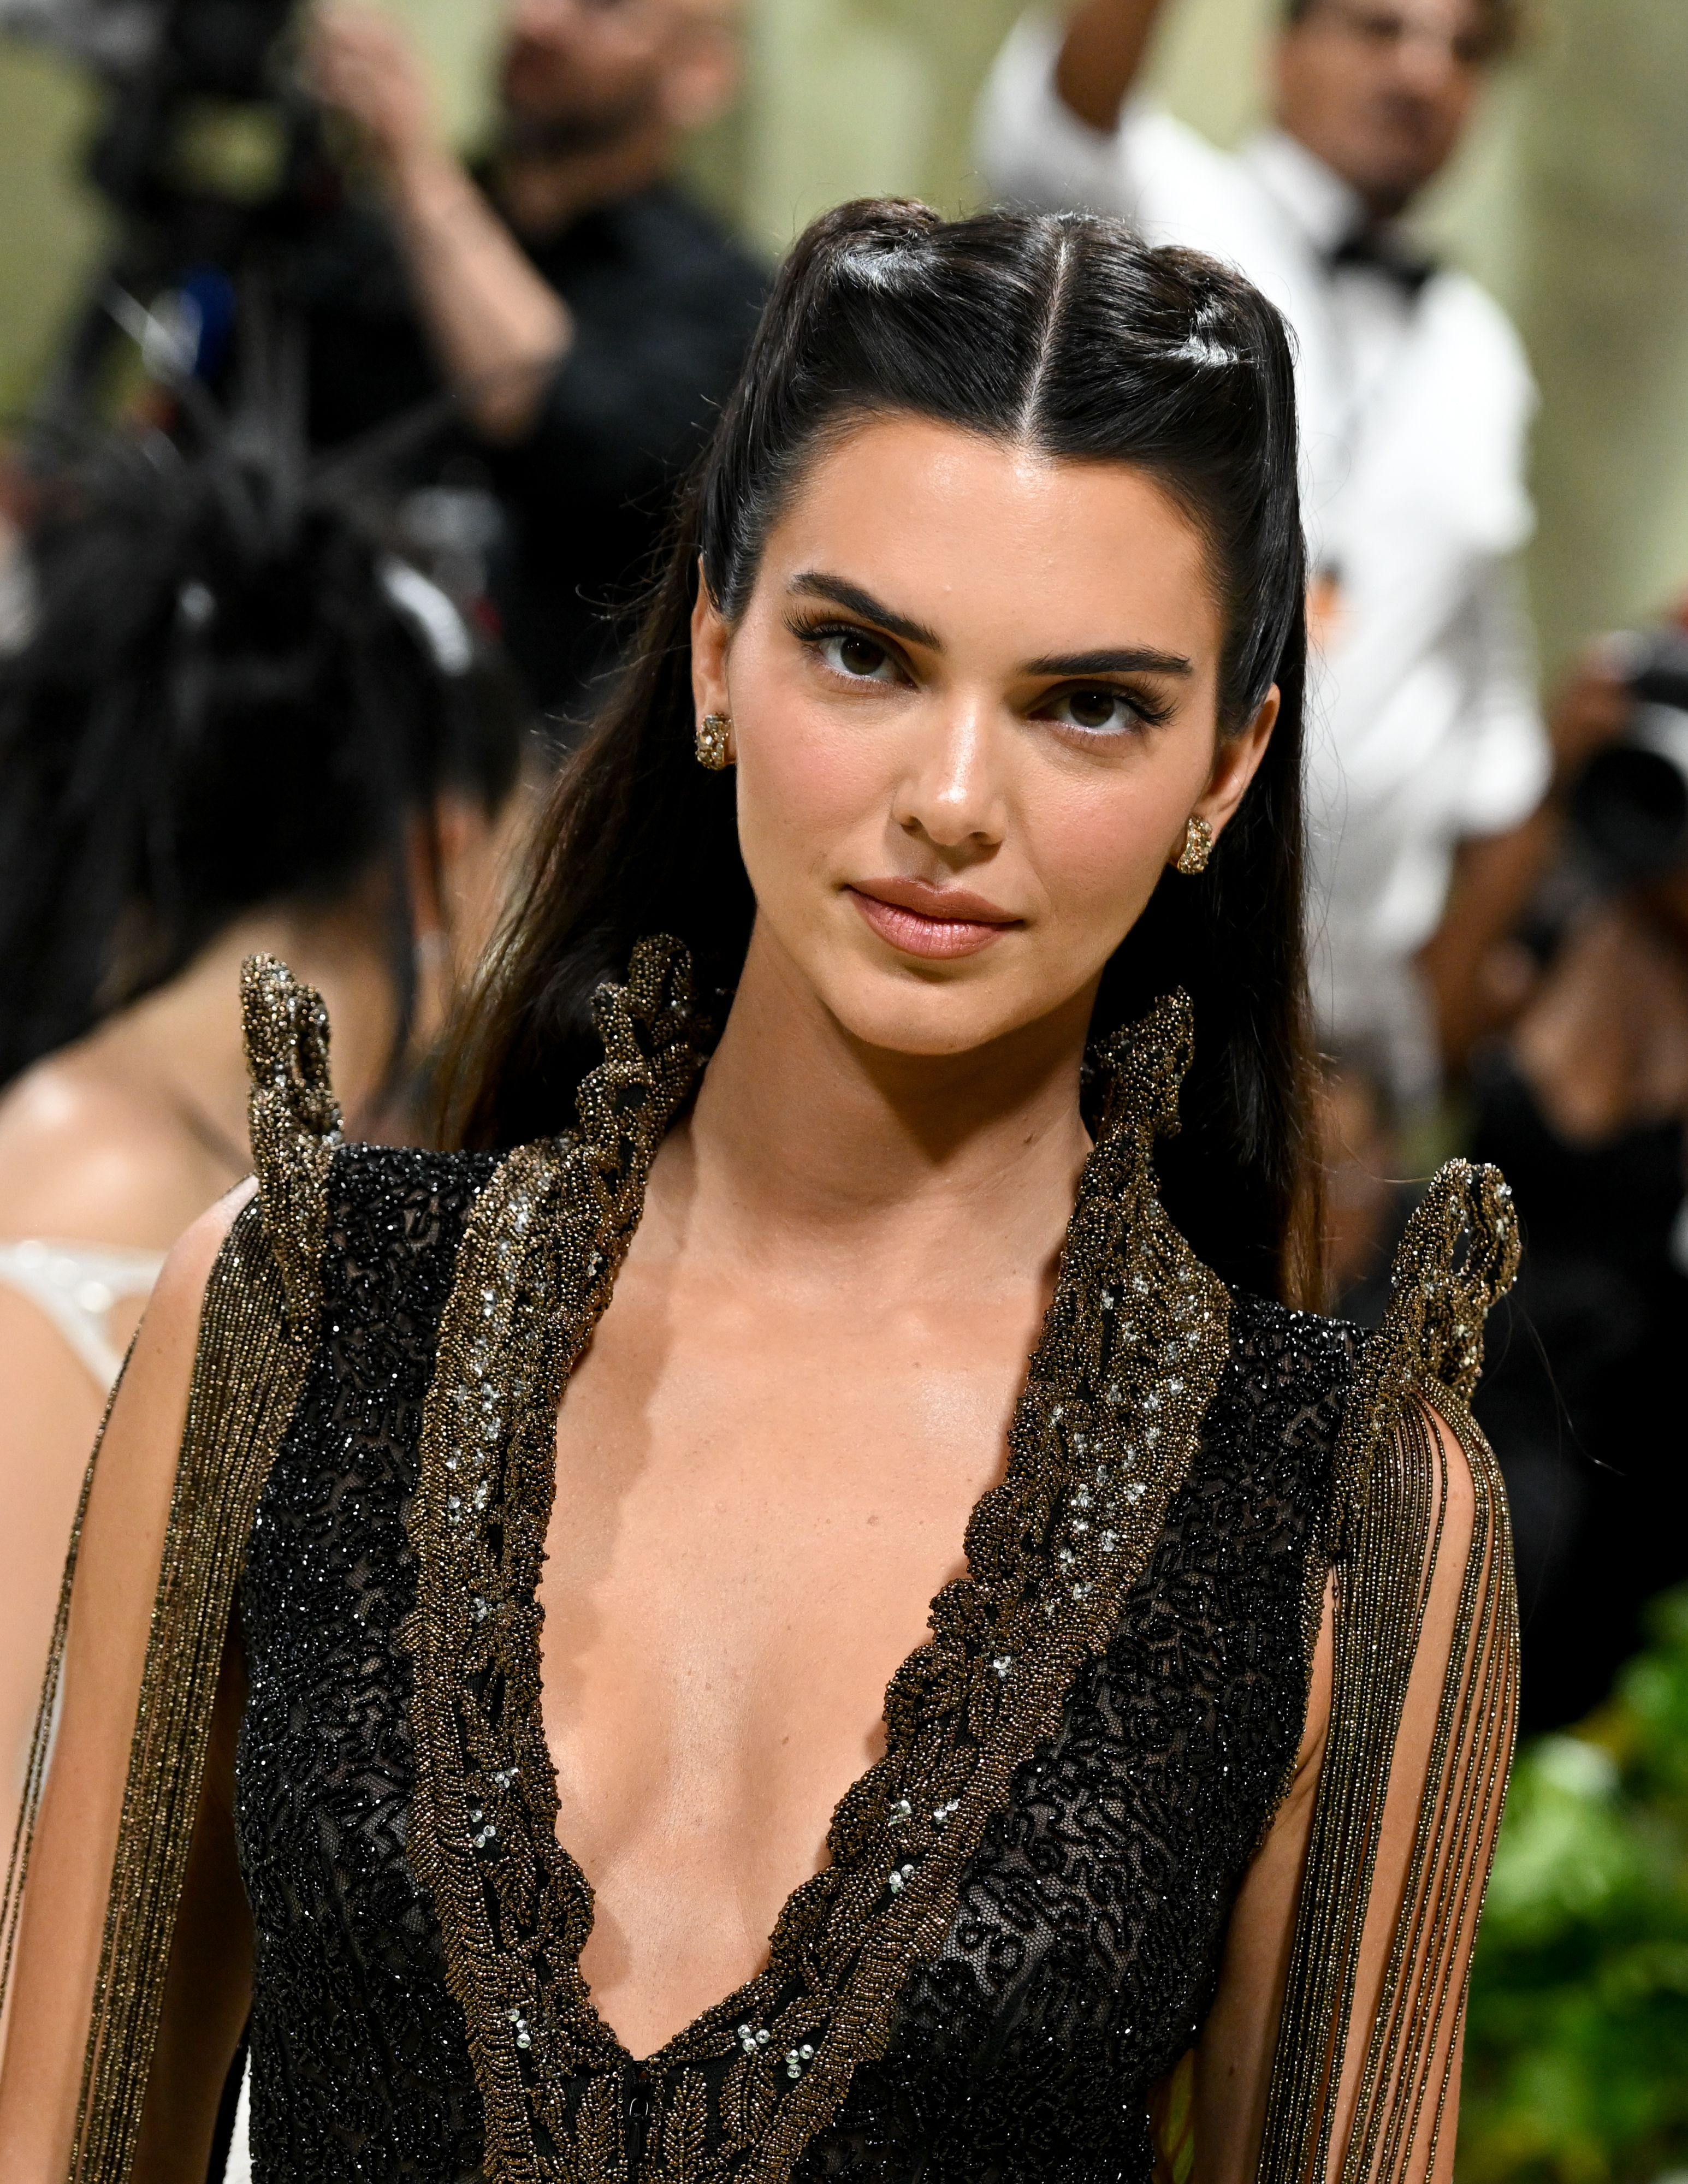 Kendall Jenner at an event, wearing an ornate, deep V-neck dress with intricate embellishments